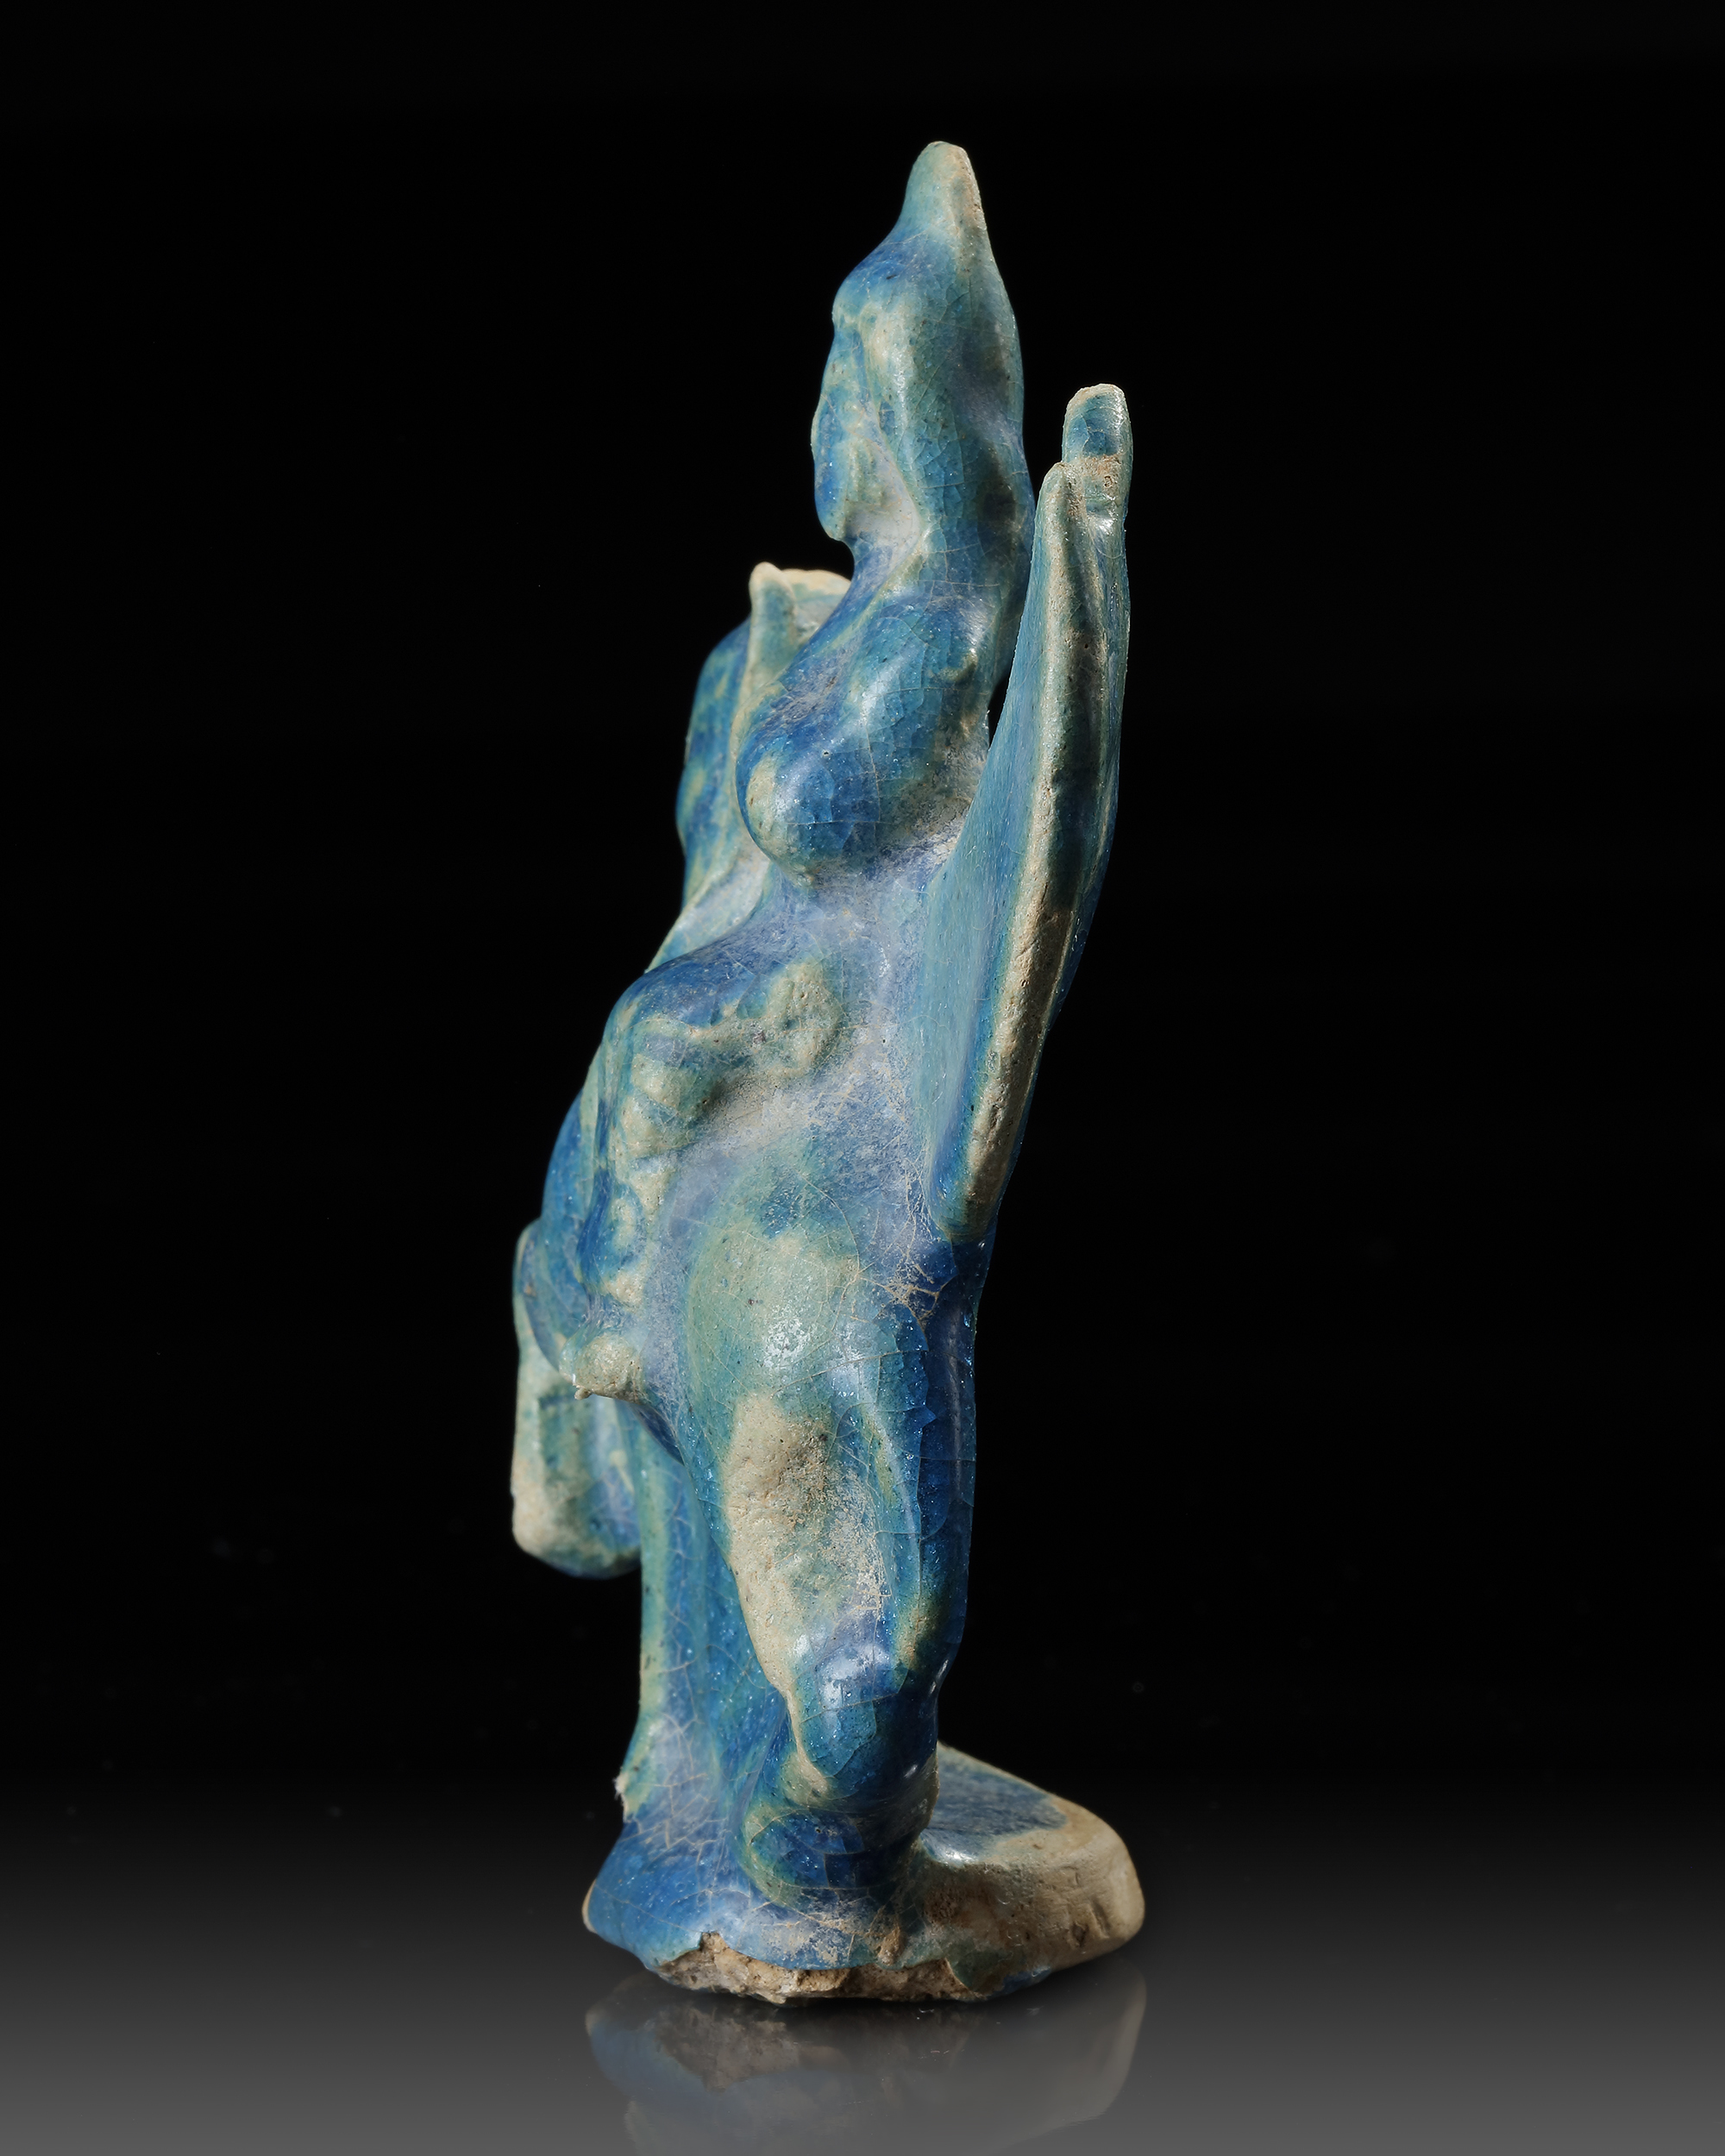 A SEATED FIGURINE ON A FLYING ANIMAL, 12TH-13TH CENTURY - Image 2 of 3